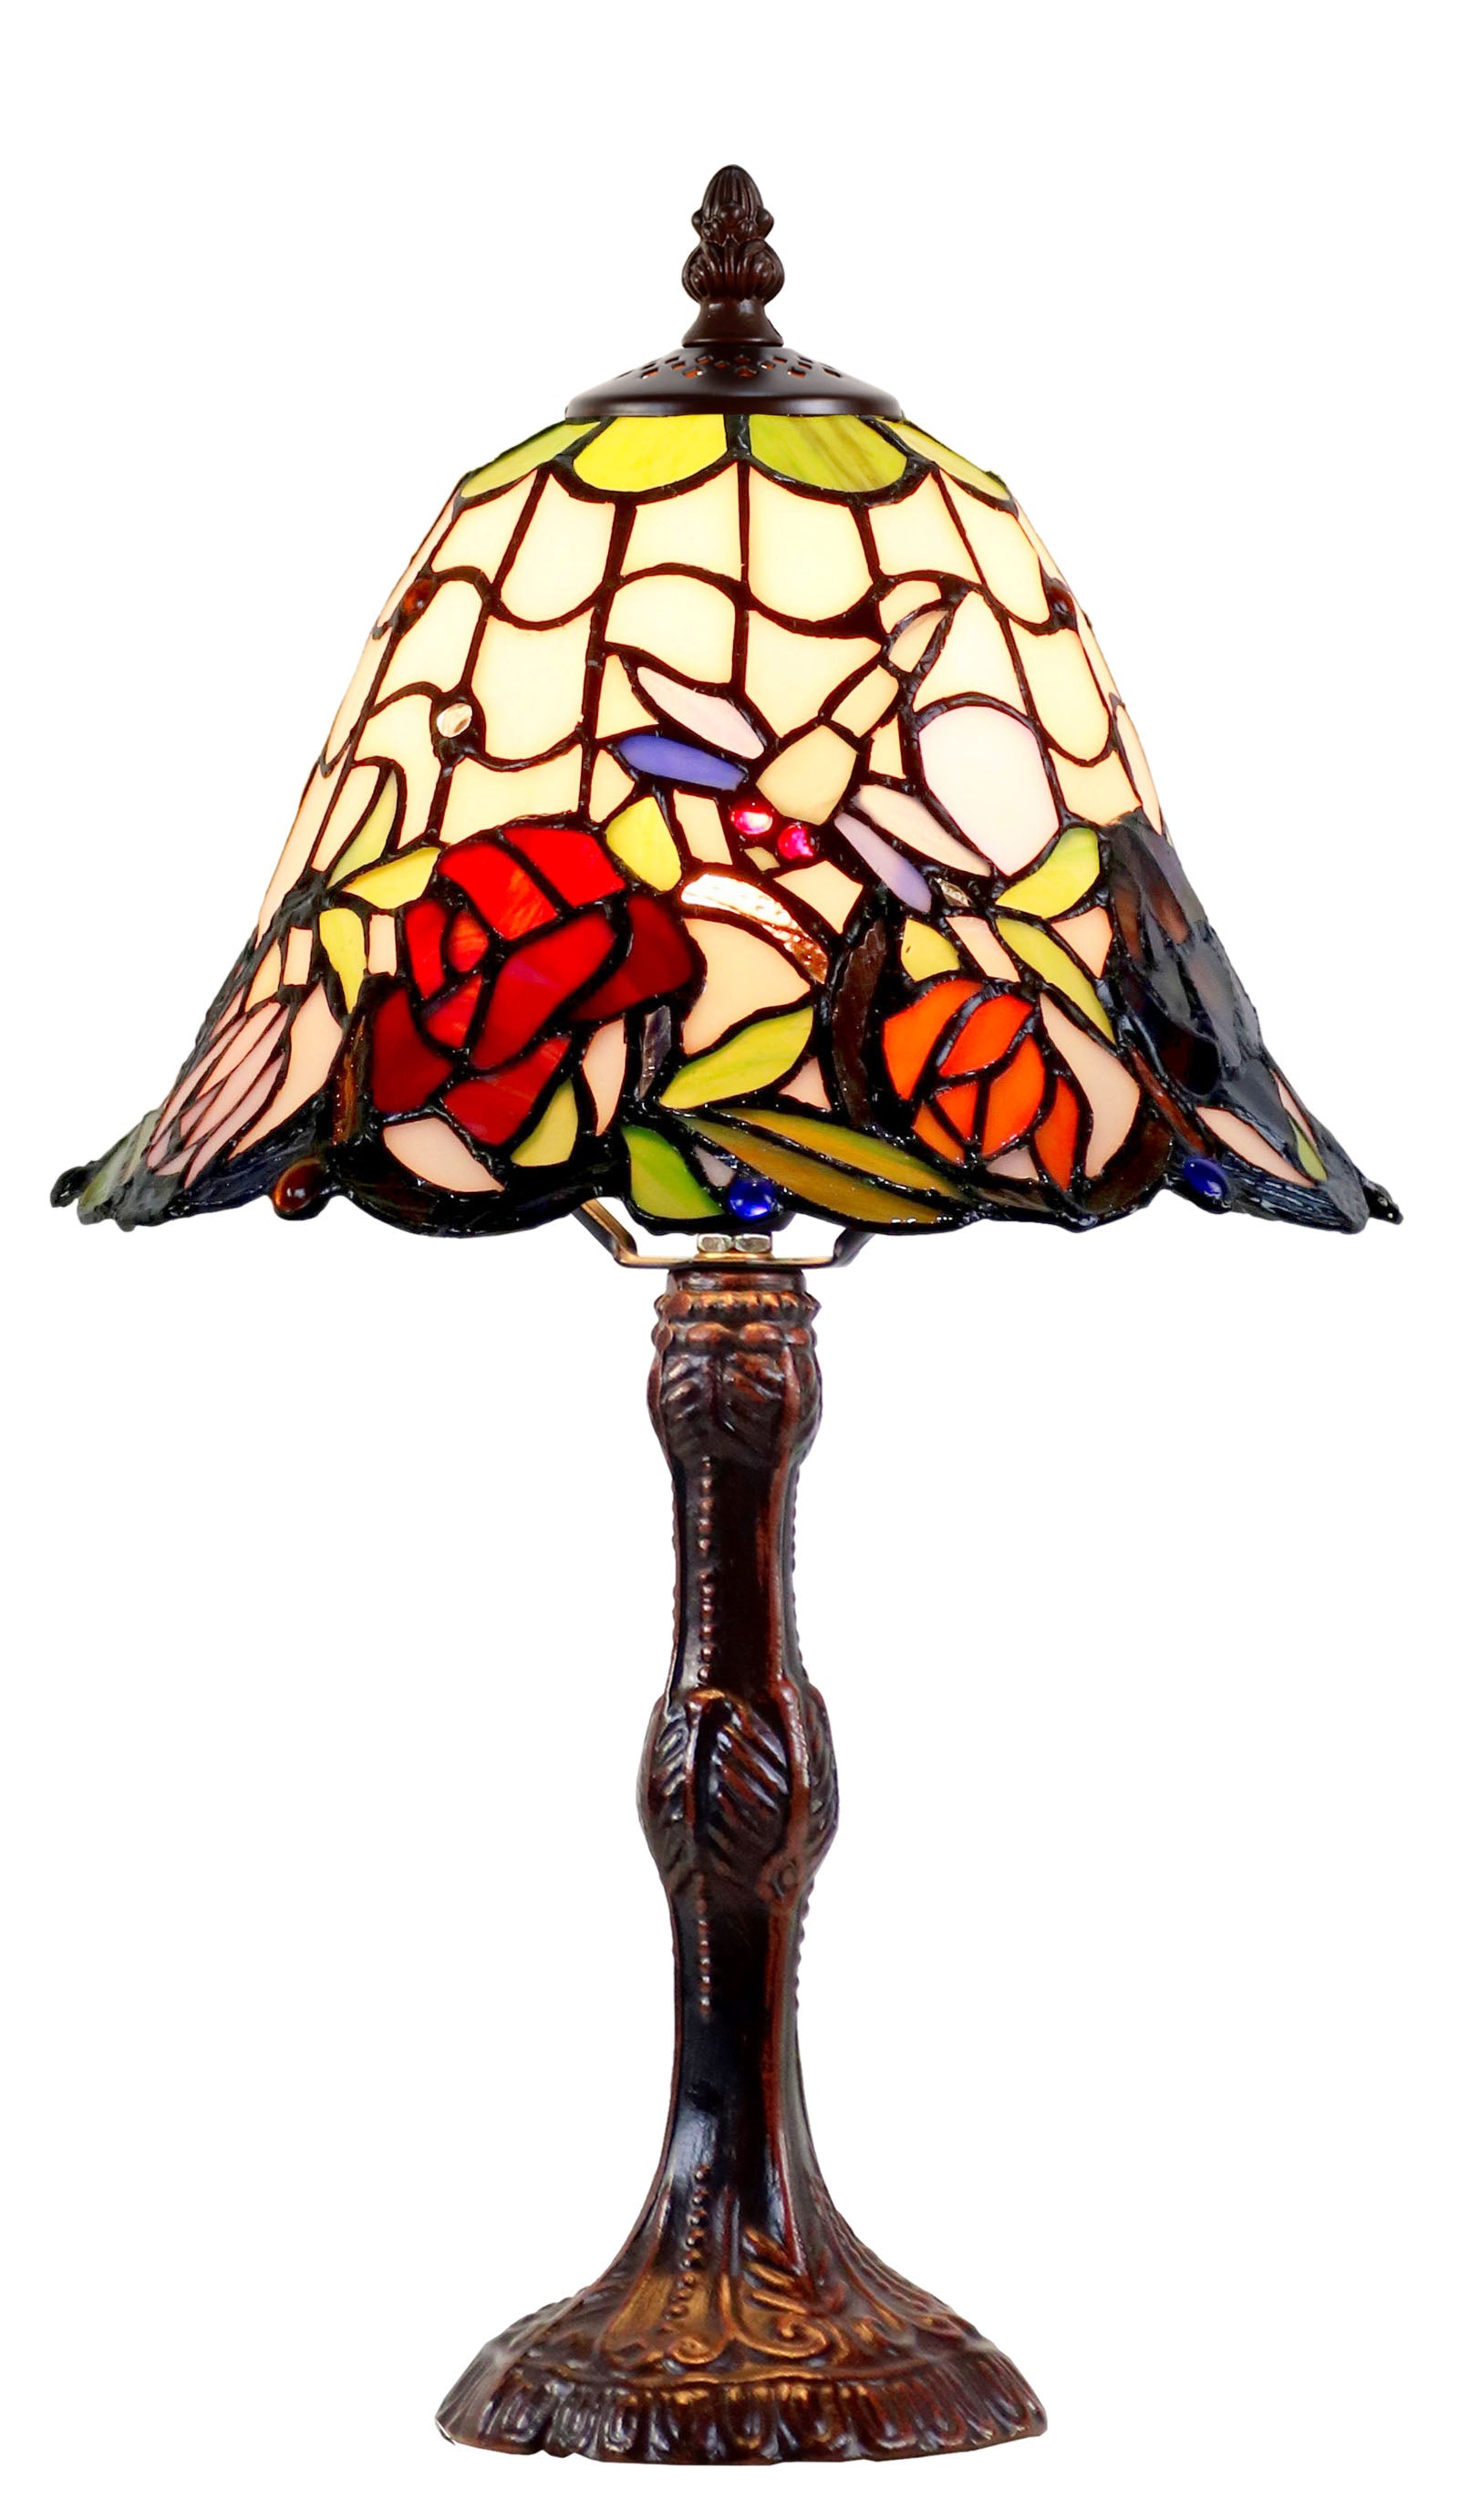 10" Carnation Tiffany Dragonfly Accent Table Lamp, Antique Bronze